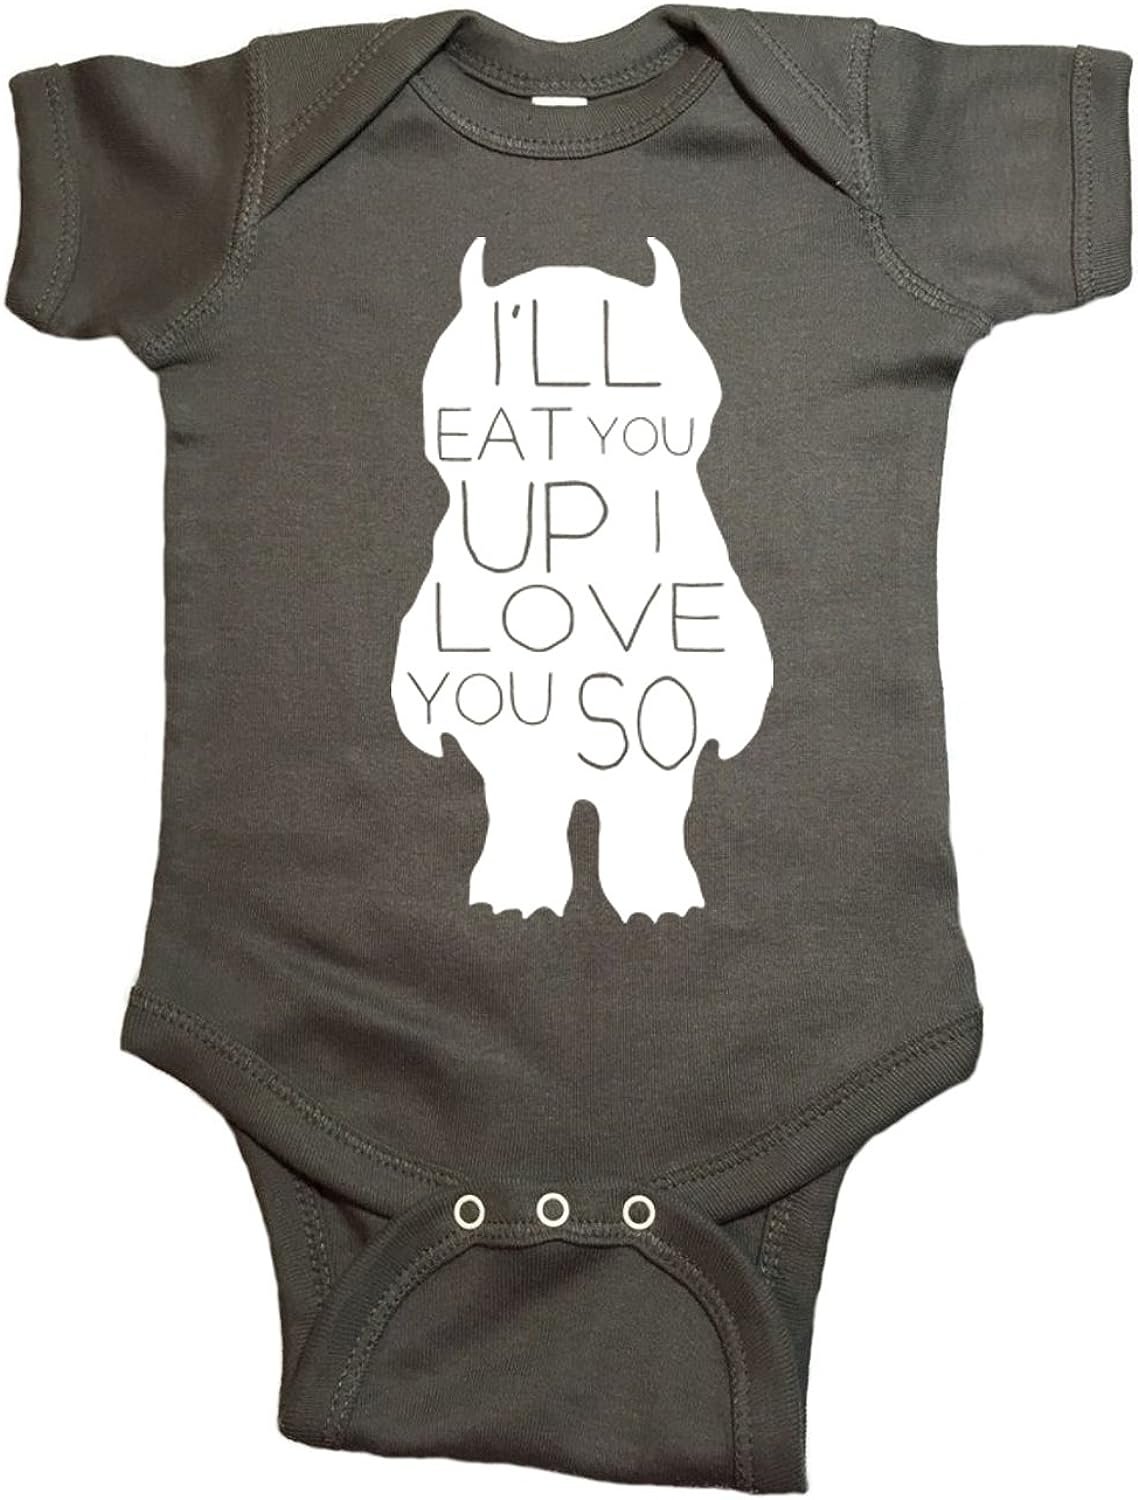 Where The Wild Things are Baby One Piece Love You So Bodysuit